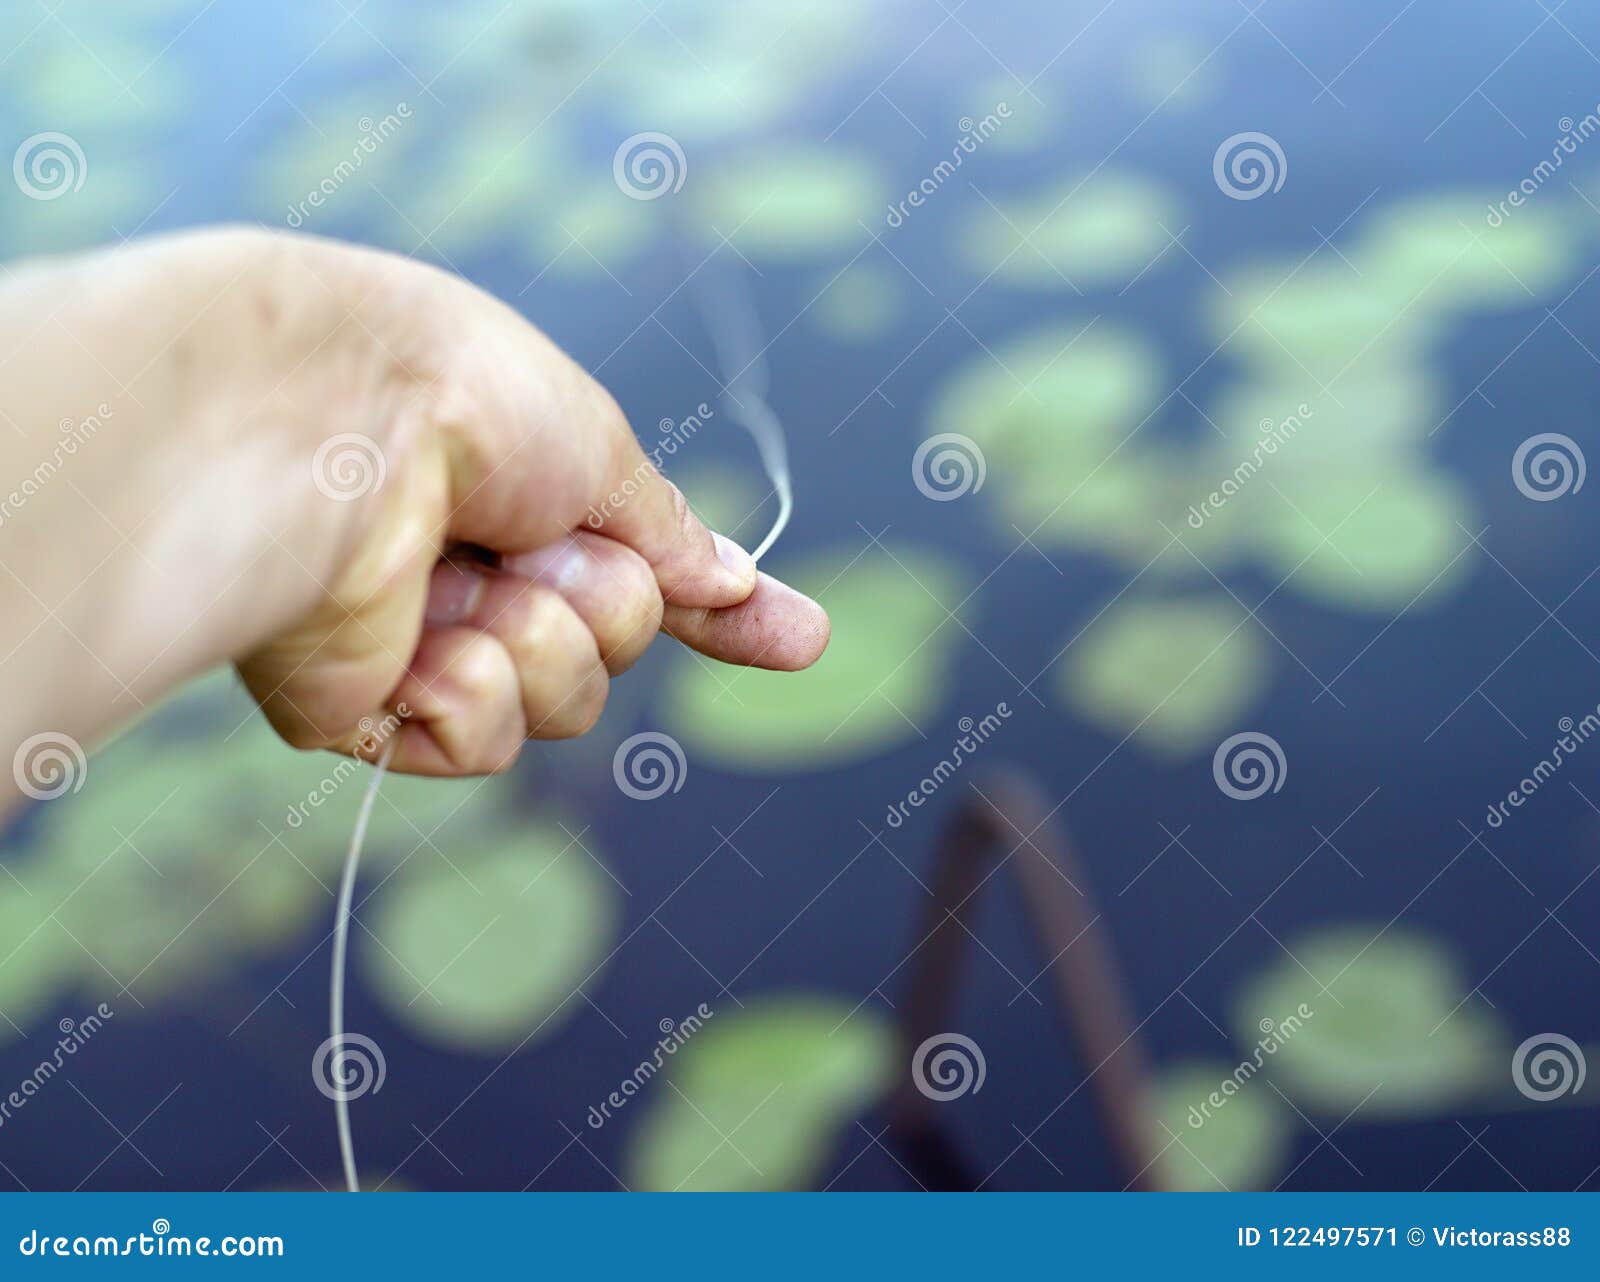 Hand with fishing line stock image. Image of line, hobby - 122497571